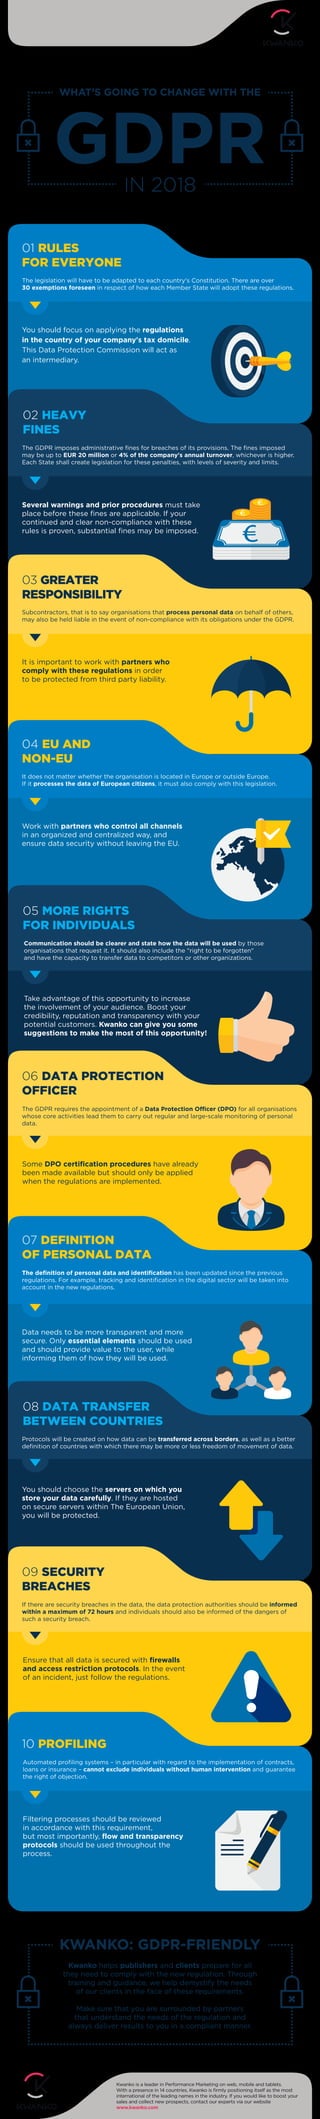 GDPR
WHAT’S GOING TO CHANGE WITH THE
IN 2018
KWANKO: GDPR-FRIENDLY
Kwanko is a leader in Performance Marketing on web, mobile and tablets.
With a presence in 14 countries, Kwanko is ﬁrmly positioning itself as the most
international of the leading names in the industry. If you would like to boost your
sales and collect new prospects, contact our experts via our website
www.kwanko.com
You should focus on applying the regulations
in the country of your company's tax domicile.
This Data Protection Commission will act as
an intermediary.
01 RULES
FOR EVERYONE
02 HEAVY
FINES
Several warnings and prior procedures must take
place before these ﬁnes are applicable. If your
continued and clear non-compliance with these
rules is proven, substantial ﬁnes may be imposed.
It is important to work with partners who
comply with these regulations in order
to be protected from third party liability.
03 GREATER
RESPONSIBILITY
Work with partners who control all channels
in an organized and centralized way, and
ensure data security without leaving the EU.
04 EU AND
NON-EU
05 MORE RIGHTS
FOR INDIVIDUALS
Take advantage of this opportunity to increase
the involvement of your audience. Boost your
credibility, reputation and transparency with your
potential customers. Kwanko can give you some
suggestions to make the most of this opportunity!
Some DPO certification procedures have already
been made available but should only be applied
when the regulations are implemented.
06 DATA PROTECTION
OFFICER
07 DEFINITION
OF PERSONAL DATA
08 DATA TRANSFER
BETWEEN COUNTRIES
09 SECURITY
BREACHES
The definition of personal data and identification has been updated since the previous
regulations. For example, tracking and identiﬁcation in the digital sector will be taken into
account in the new regulations.
Data needs to be more transparent and more
secure. Only essential elements should be used
and should provide value to the user, while
informing them of how they will be used.
10 PROFILING
Filtering processes should be reviewed
in accordance with this requirement,
but most importantly, flow and transparency
protocols should be used throughout the
process.
Kwanko helps publishers and clients prepare for all
they need to comply with the new regulation. Through
training and guidance, we help demystify the needs
of our clients in the face of these requirements.
Make sure that you are surrounded by partners
that understand the needs of the regulation and
always deliver results to you in a compliant manner.
You should choose the servers on which you
store your data carefully. If they are hosted
on secure servers within The European Union,
you will be protected.
Ensure that all data is secured with firewalls
and access restriction protocols. In the event
of an incident, just follow the regulations.
The legislation will have to be adapted to each country's Constitution. There are over
30 exemptions foreseen in respect of how each Member State will adopt these regulations.
The GDPR imposes administrative ﬁnes for breaches of its provisions. The ﬁnes imposed
may be up to EUR 20 million or 4% of the company's annual turnover, whichever is higher.
Each State shall create legislation for these penalties, with levels of severity and limits.
Subcontractors, that is to say organisations that process personal data on behalf of others,
may also be held liable in the event of non-compliance with its obligations under the GDPR.
It does not matter whether the organisation is located in Europe or outside Europe.
If it processes the data of European citizens, it must also comply with this legislation.
Communication should be clearer and state how the data will be used by those
organisations that request it. It should also include the "right to be forgotten"
and have the capacity to transfer data to competitors or other organizations.
The GDPR requires the appointment of a Data Protection Officer (DPO) for all organisations
whose core activities lead them to carry out regular and large-scale monitoring of personal
data.
Protocols will be created on how data can be transferred across borders, as well as a better
deﬁnition of countries with which there may be more or less freedom of movement of data.
If there are security breaches in the data, the data protection authorities should be informed
within a maximum of 72 hours and individuals should also be informed of the dangers of
such a security breach.
Automated proﬁling systems – in particular with regard to the implementation of contracts,
loans or insurance – cannot exclude individuals without human intervention and guarantee
the right of objection.
 